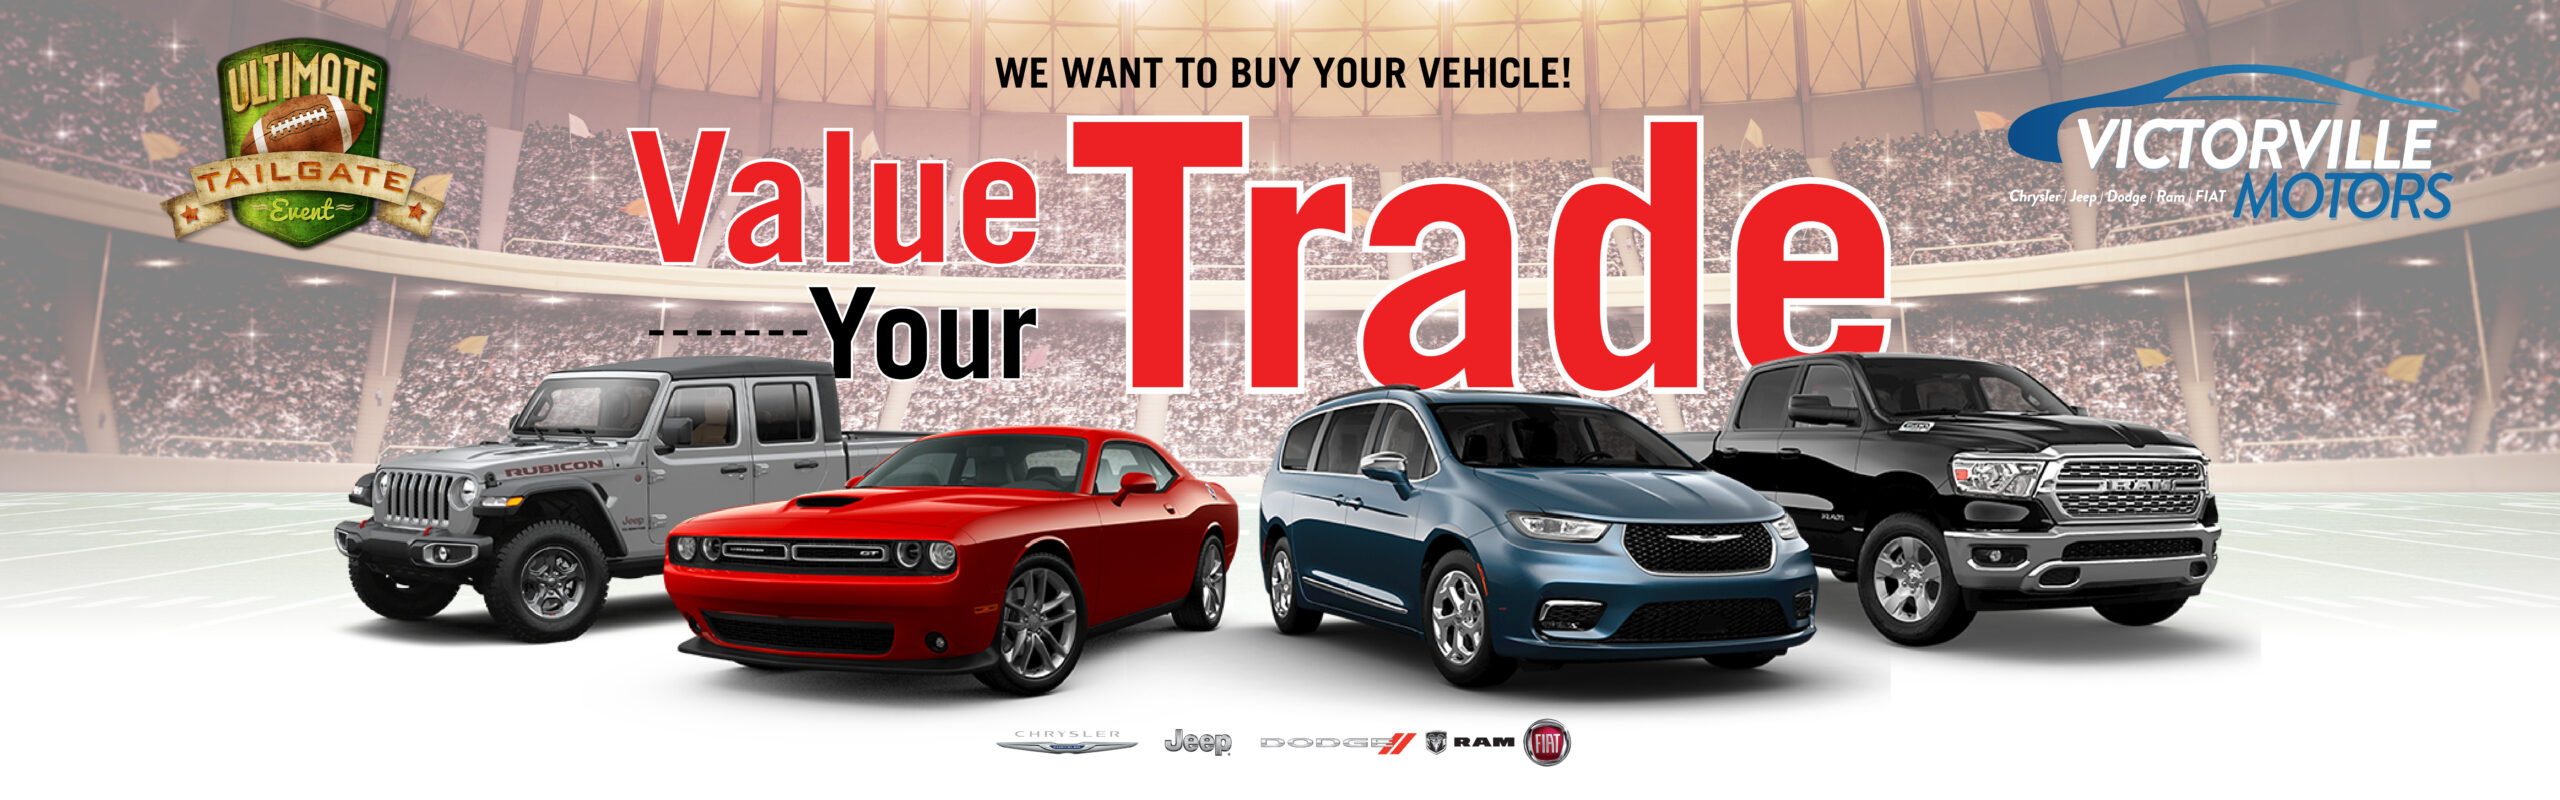 Value Your Trade online with Victorville Motors